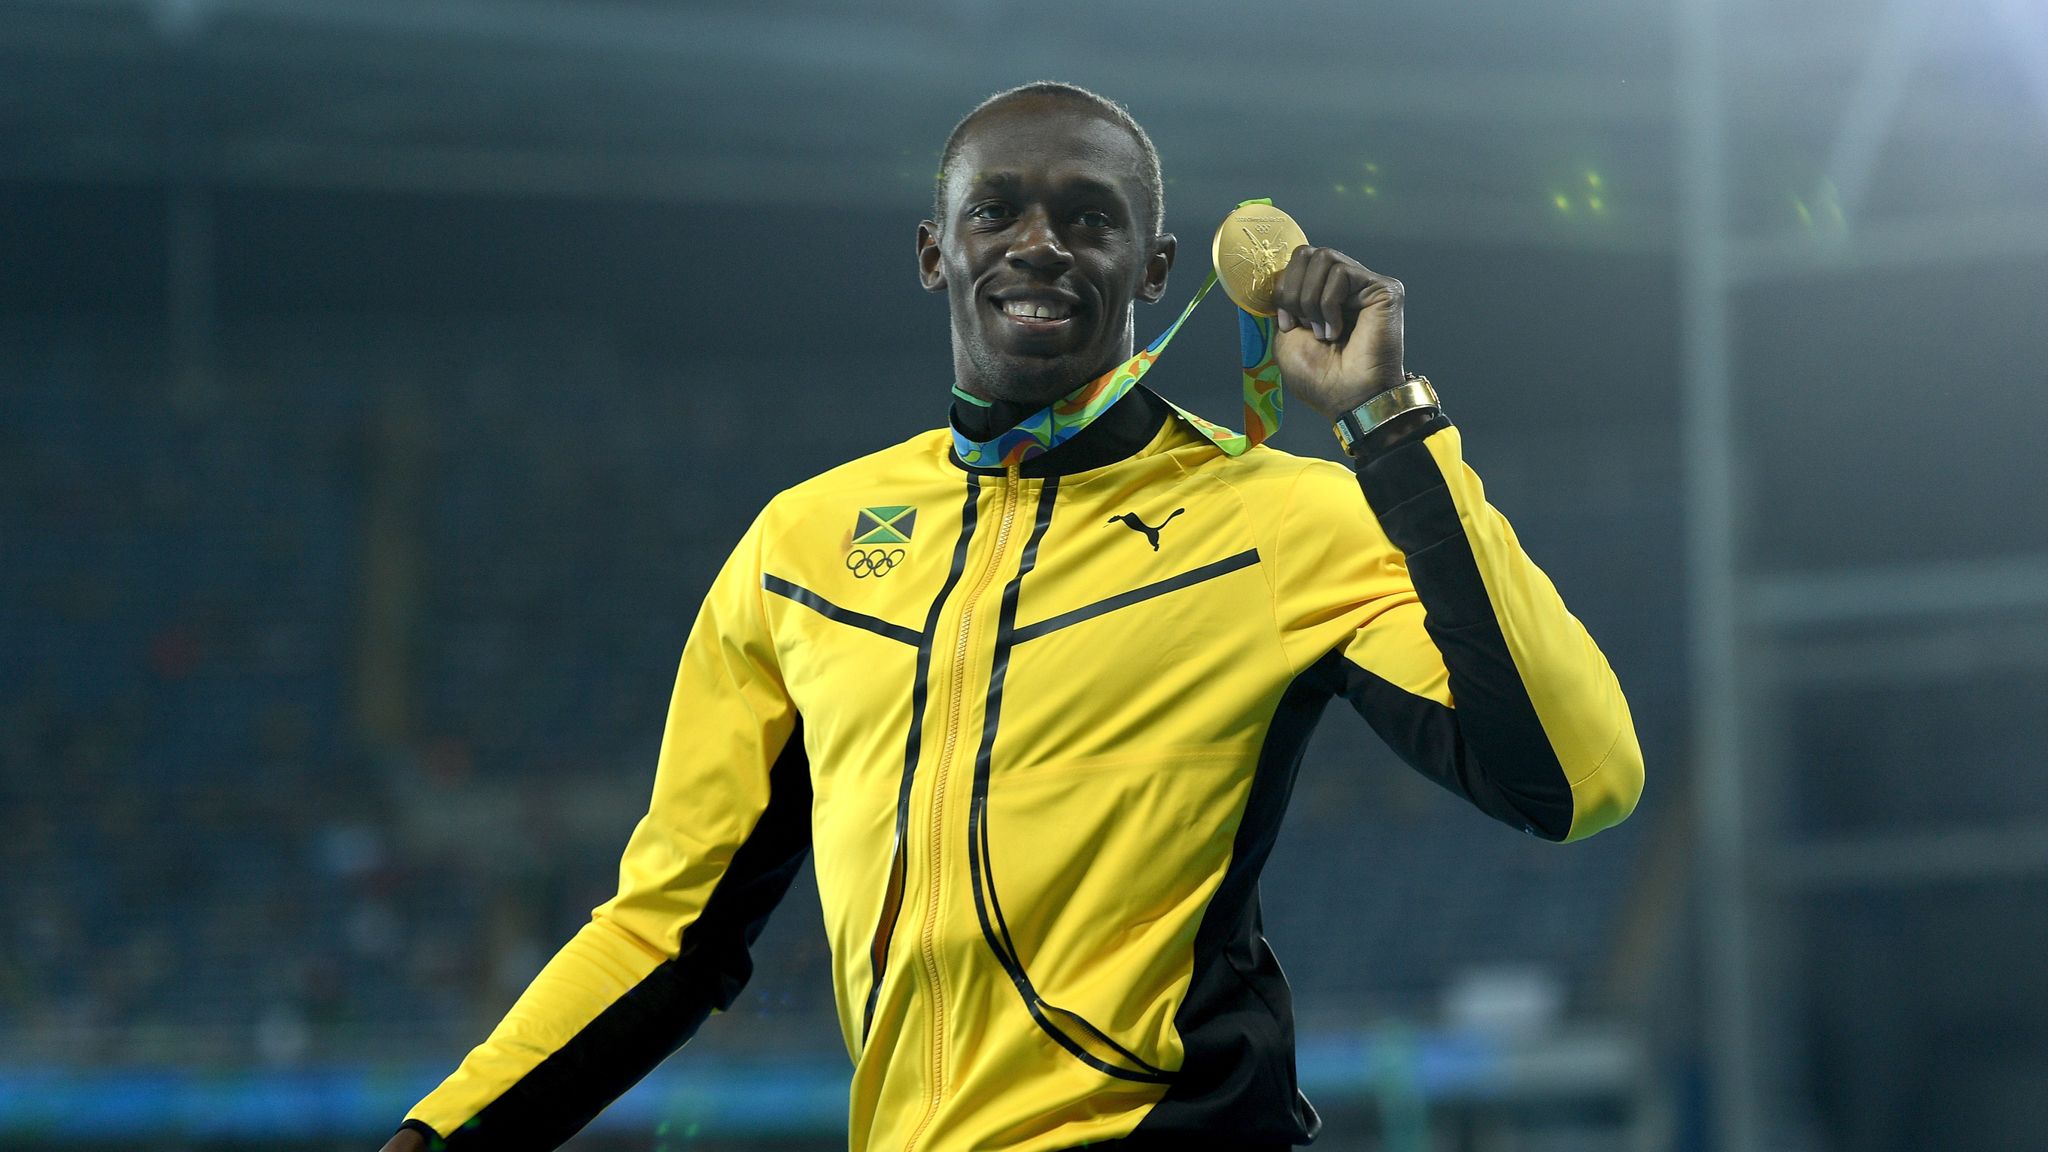 Usain Bolt has to work for 100-meter victory